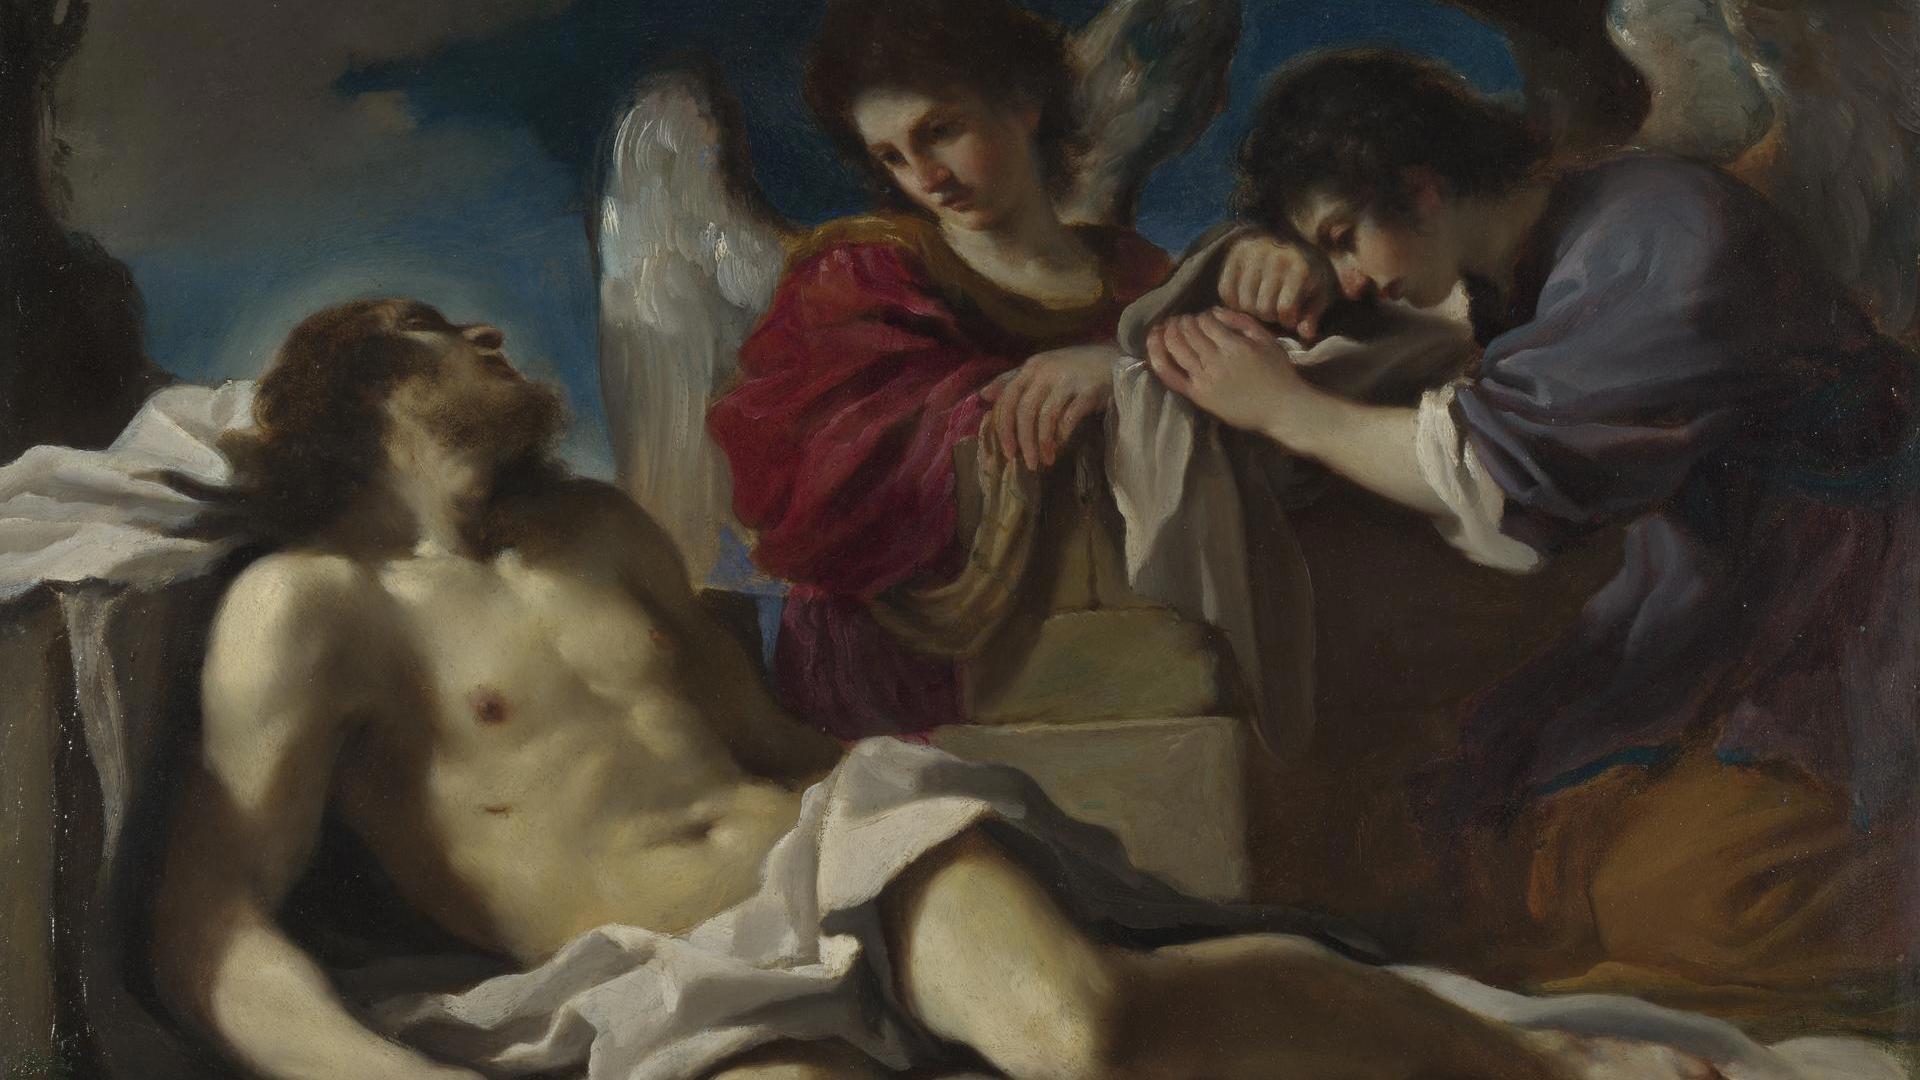 Guercino | The Dead Christ mourned by Two Angels | NG22 | National Gallery,  London